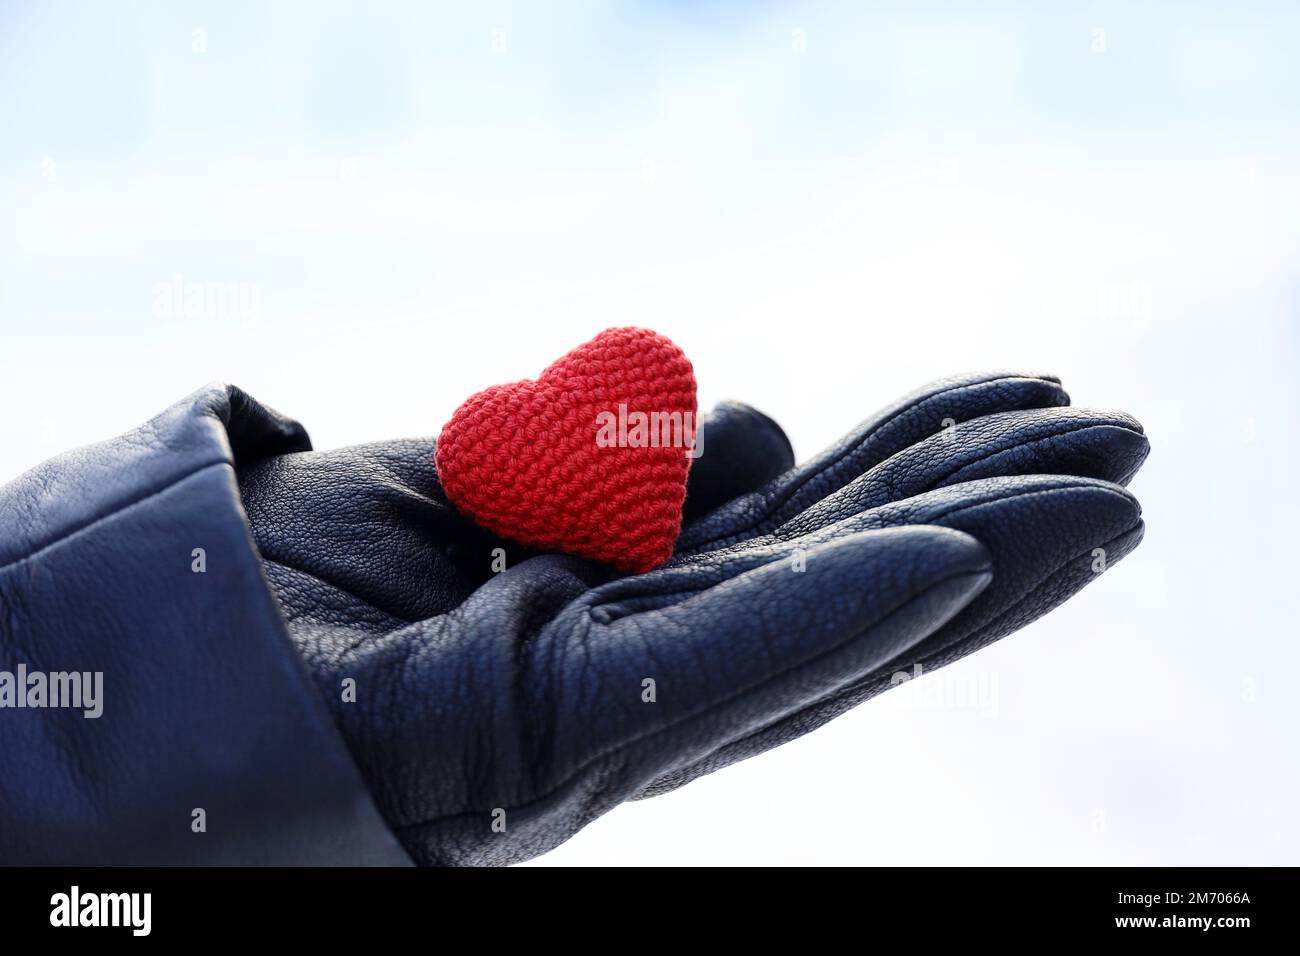 Red knitted heart in female palm of hand in black leather glove on snow background. Concept of romantic love, Valentine's day, winter weather Stock Photo